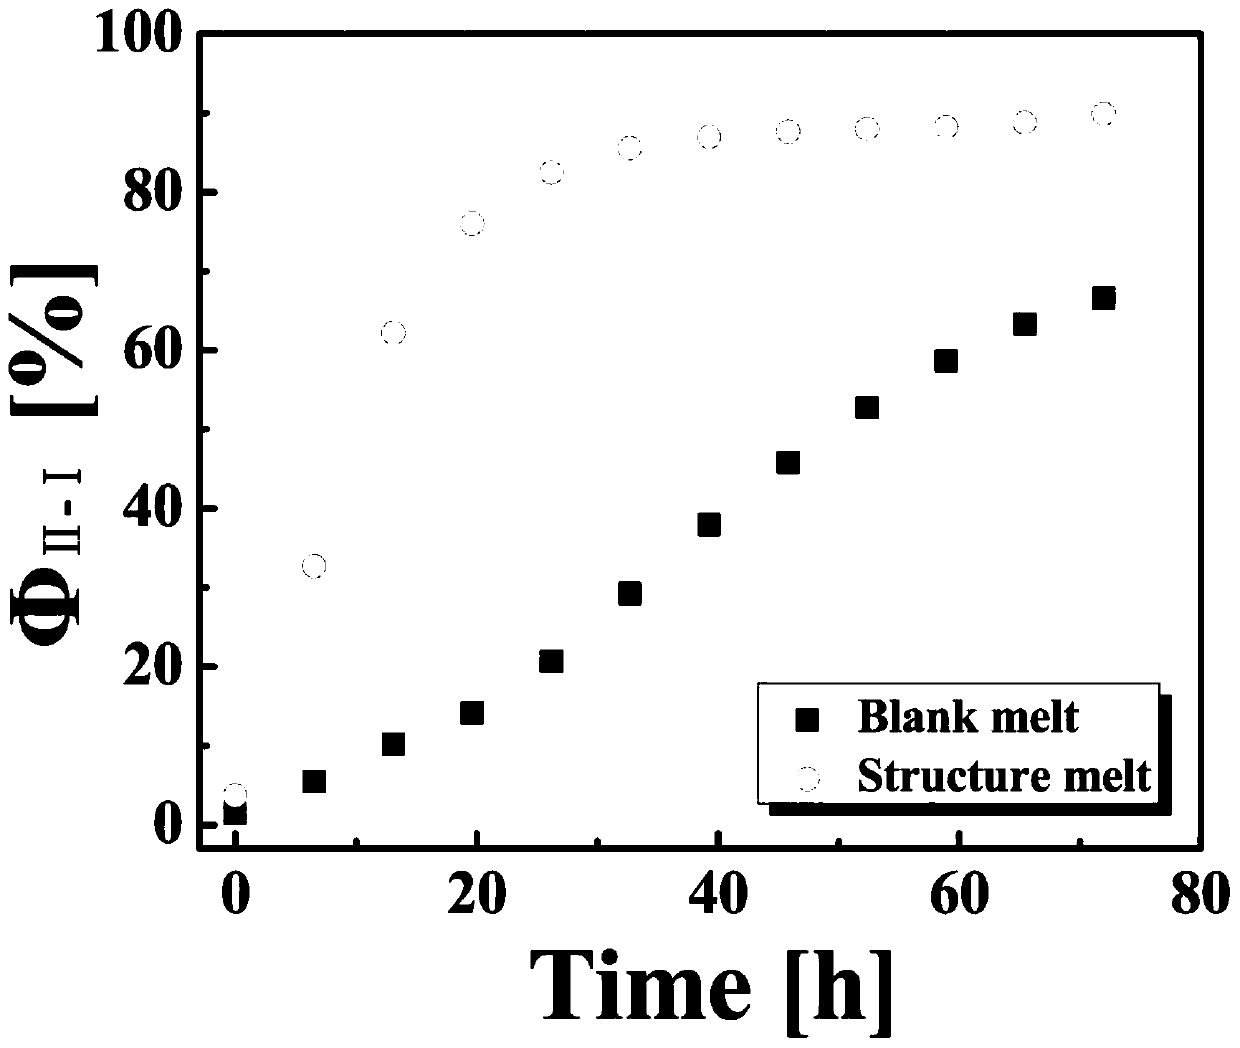 A method for accelerating the transformation of crystal form II to crystal form I by applying flow shear to isotactic polybutene-1 structure melt